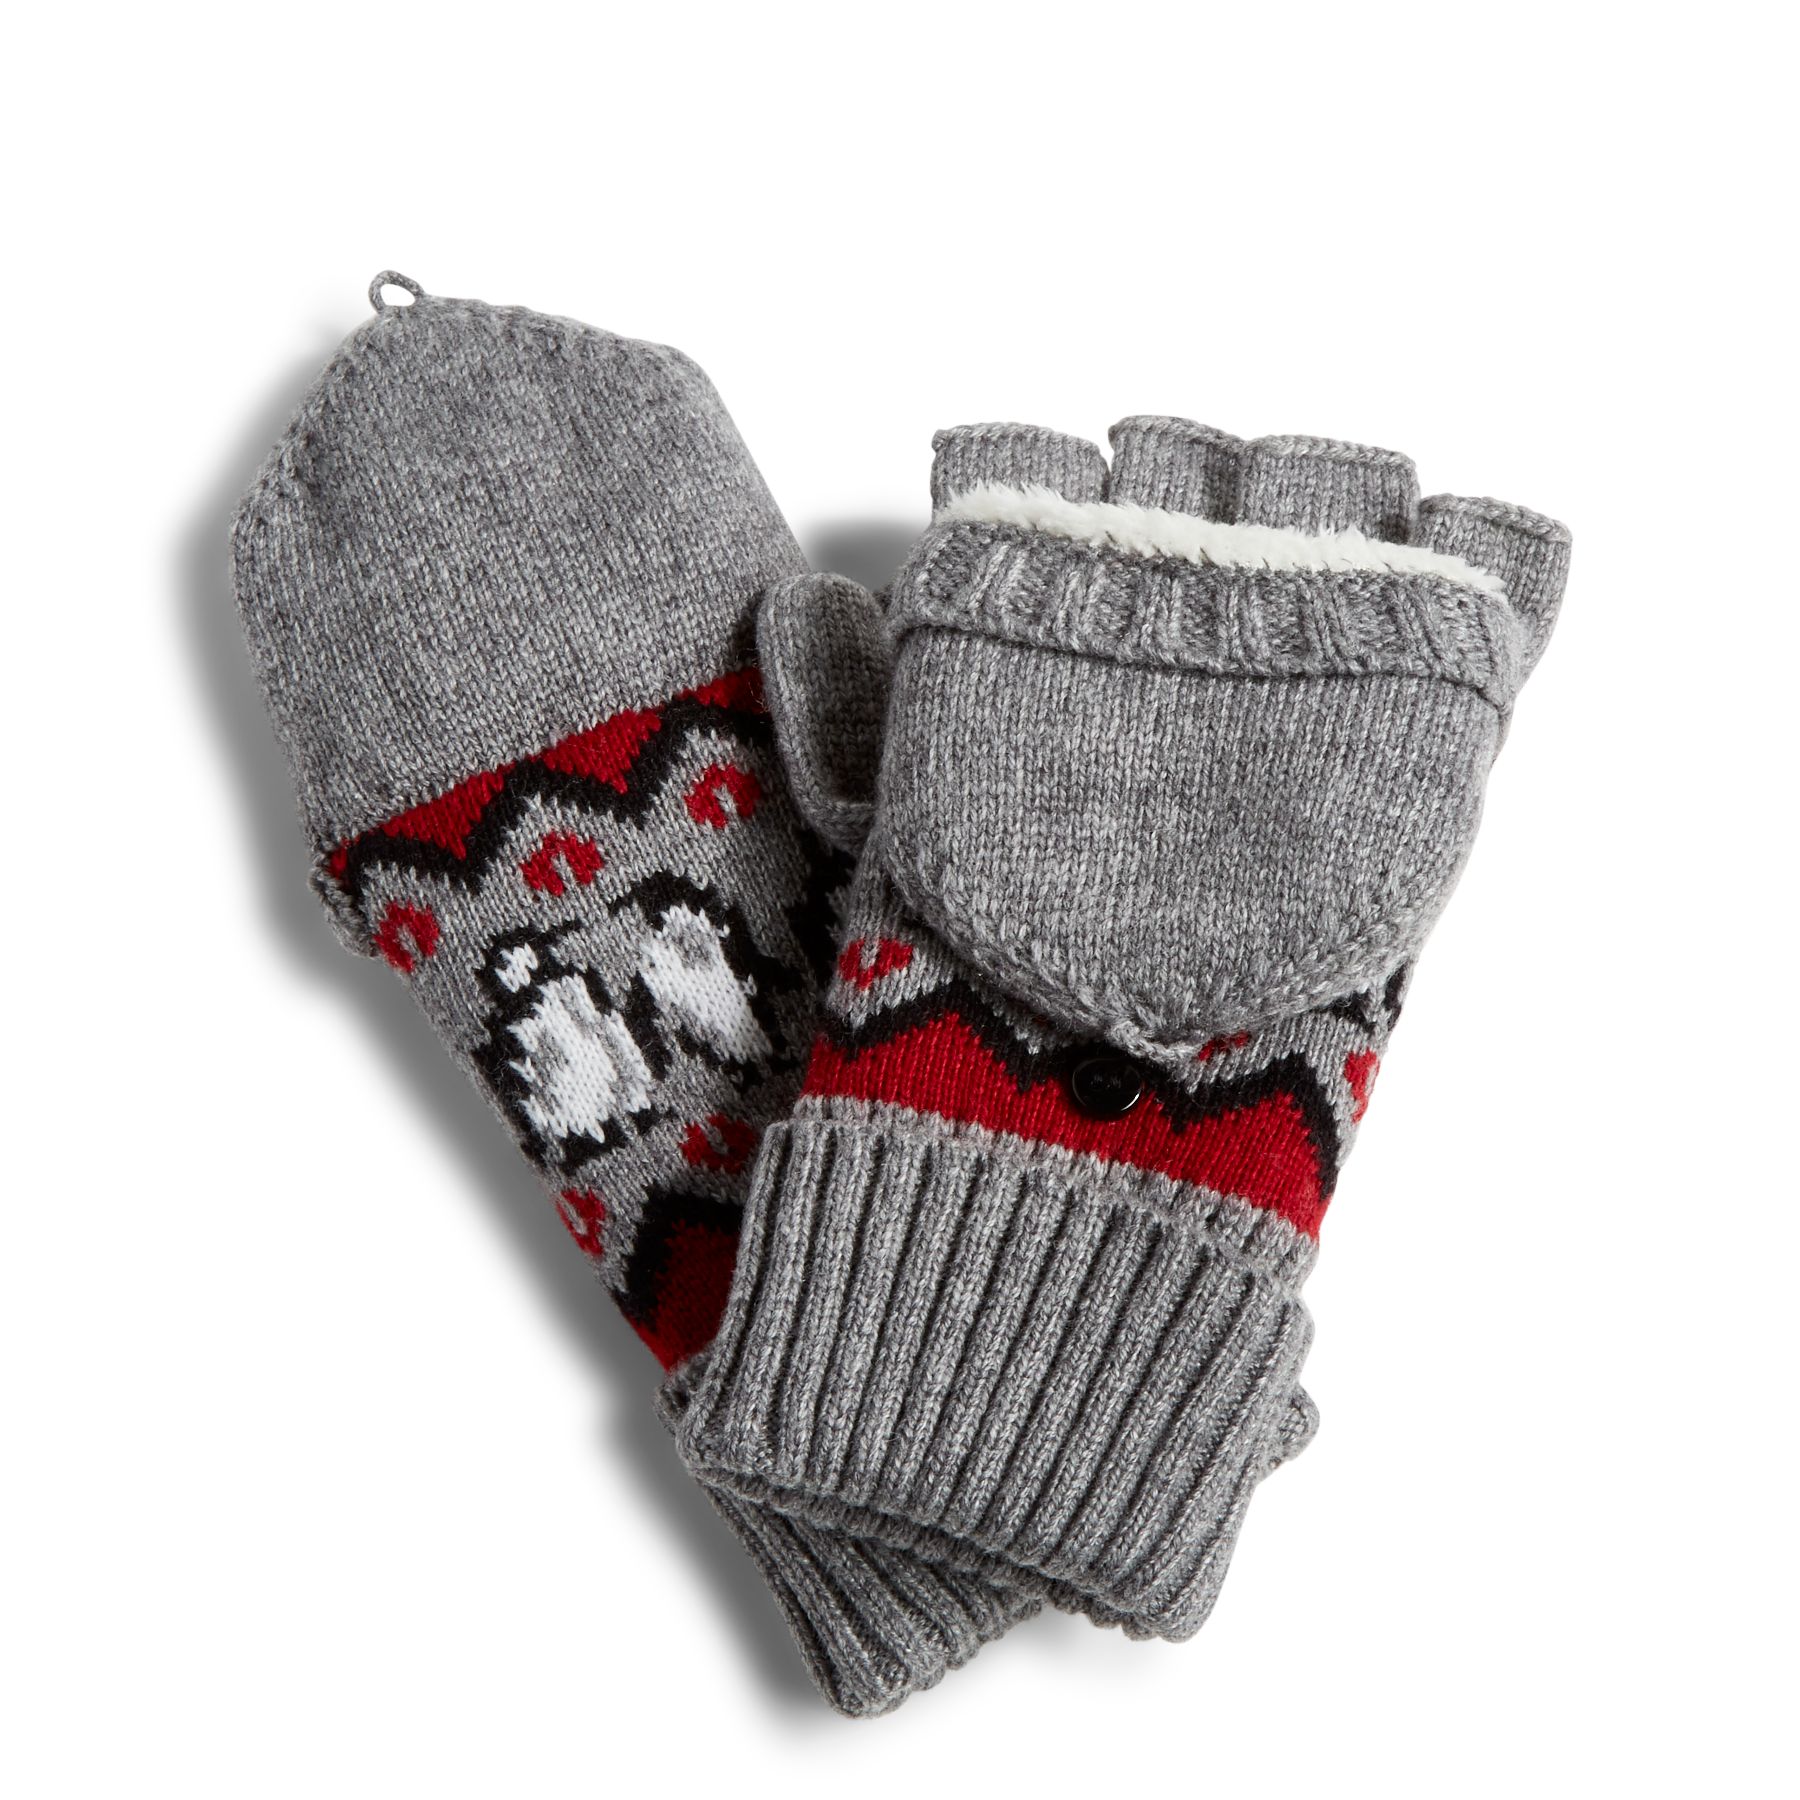 Vera Bradley Cozy Convertible Mittens in Penguins IntarsiaCold Weather Accessories